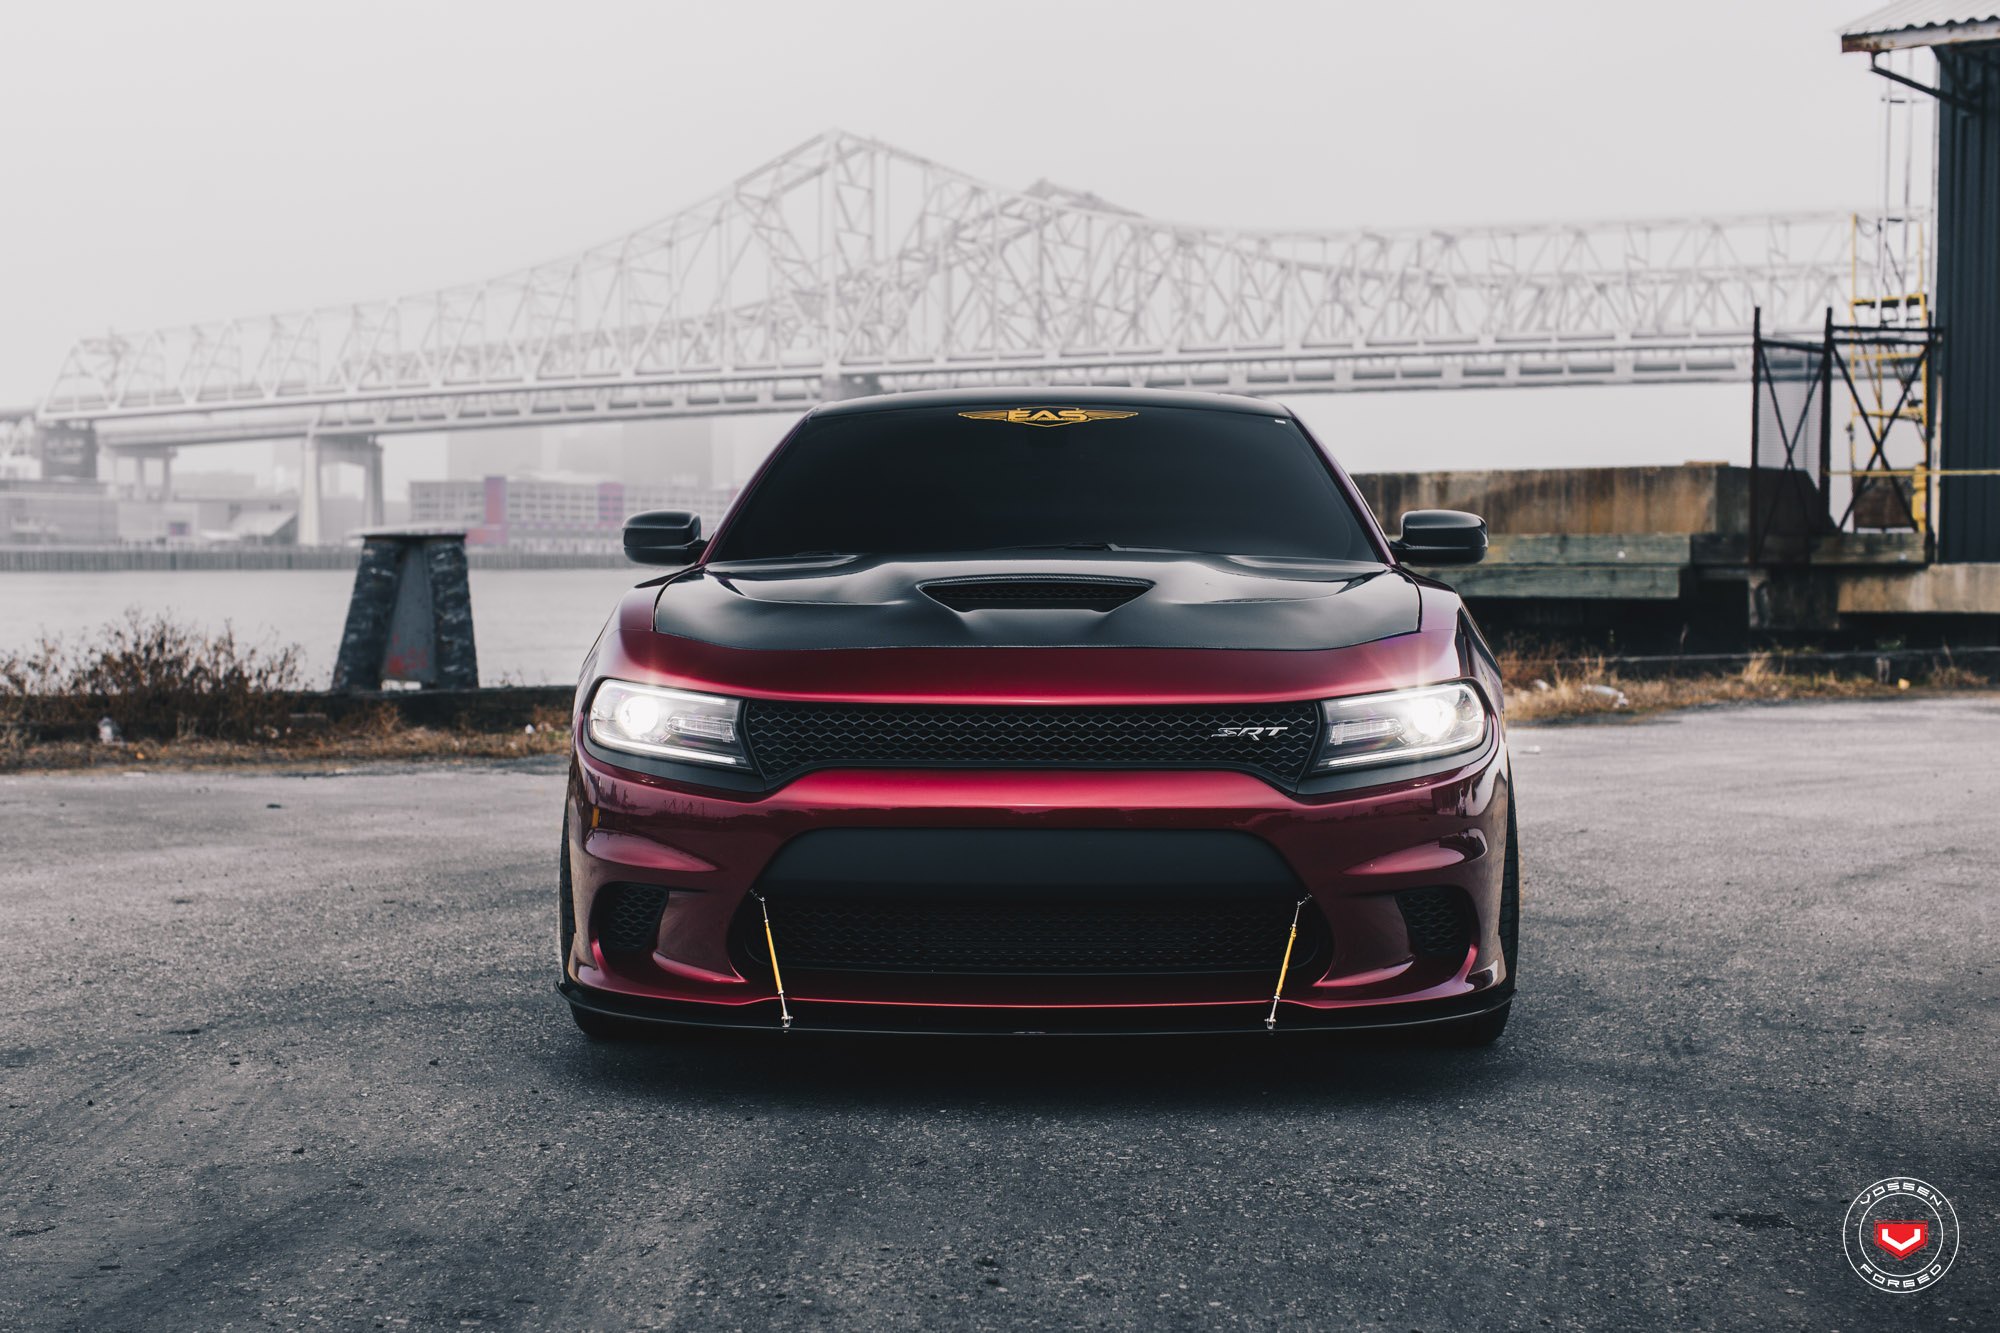 Aftermarket Front Bumper on Red Dodge Charger SRT - Photo by Vossen